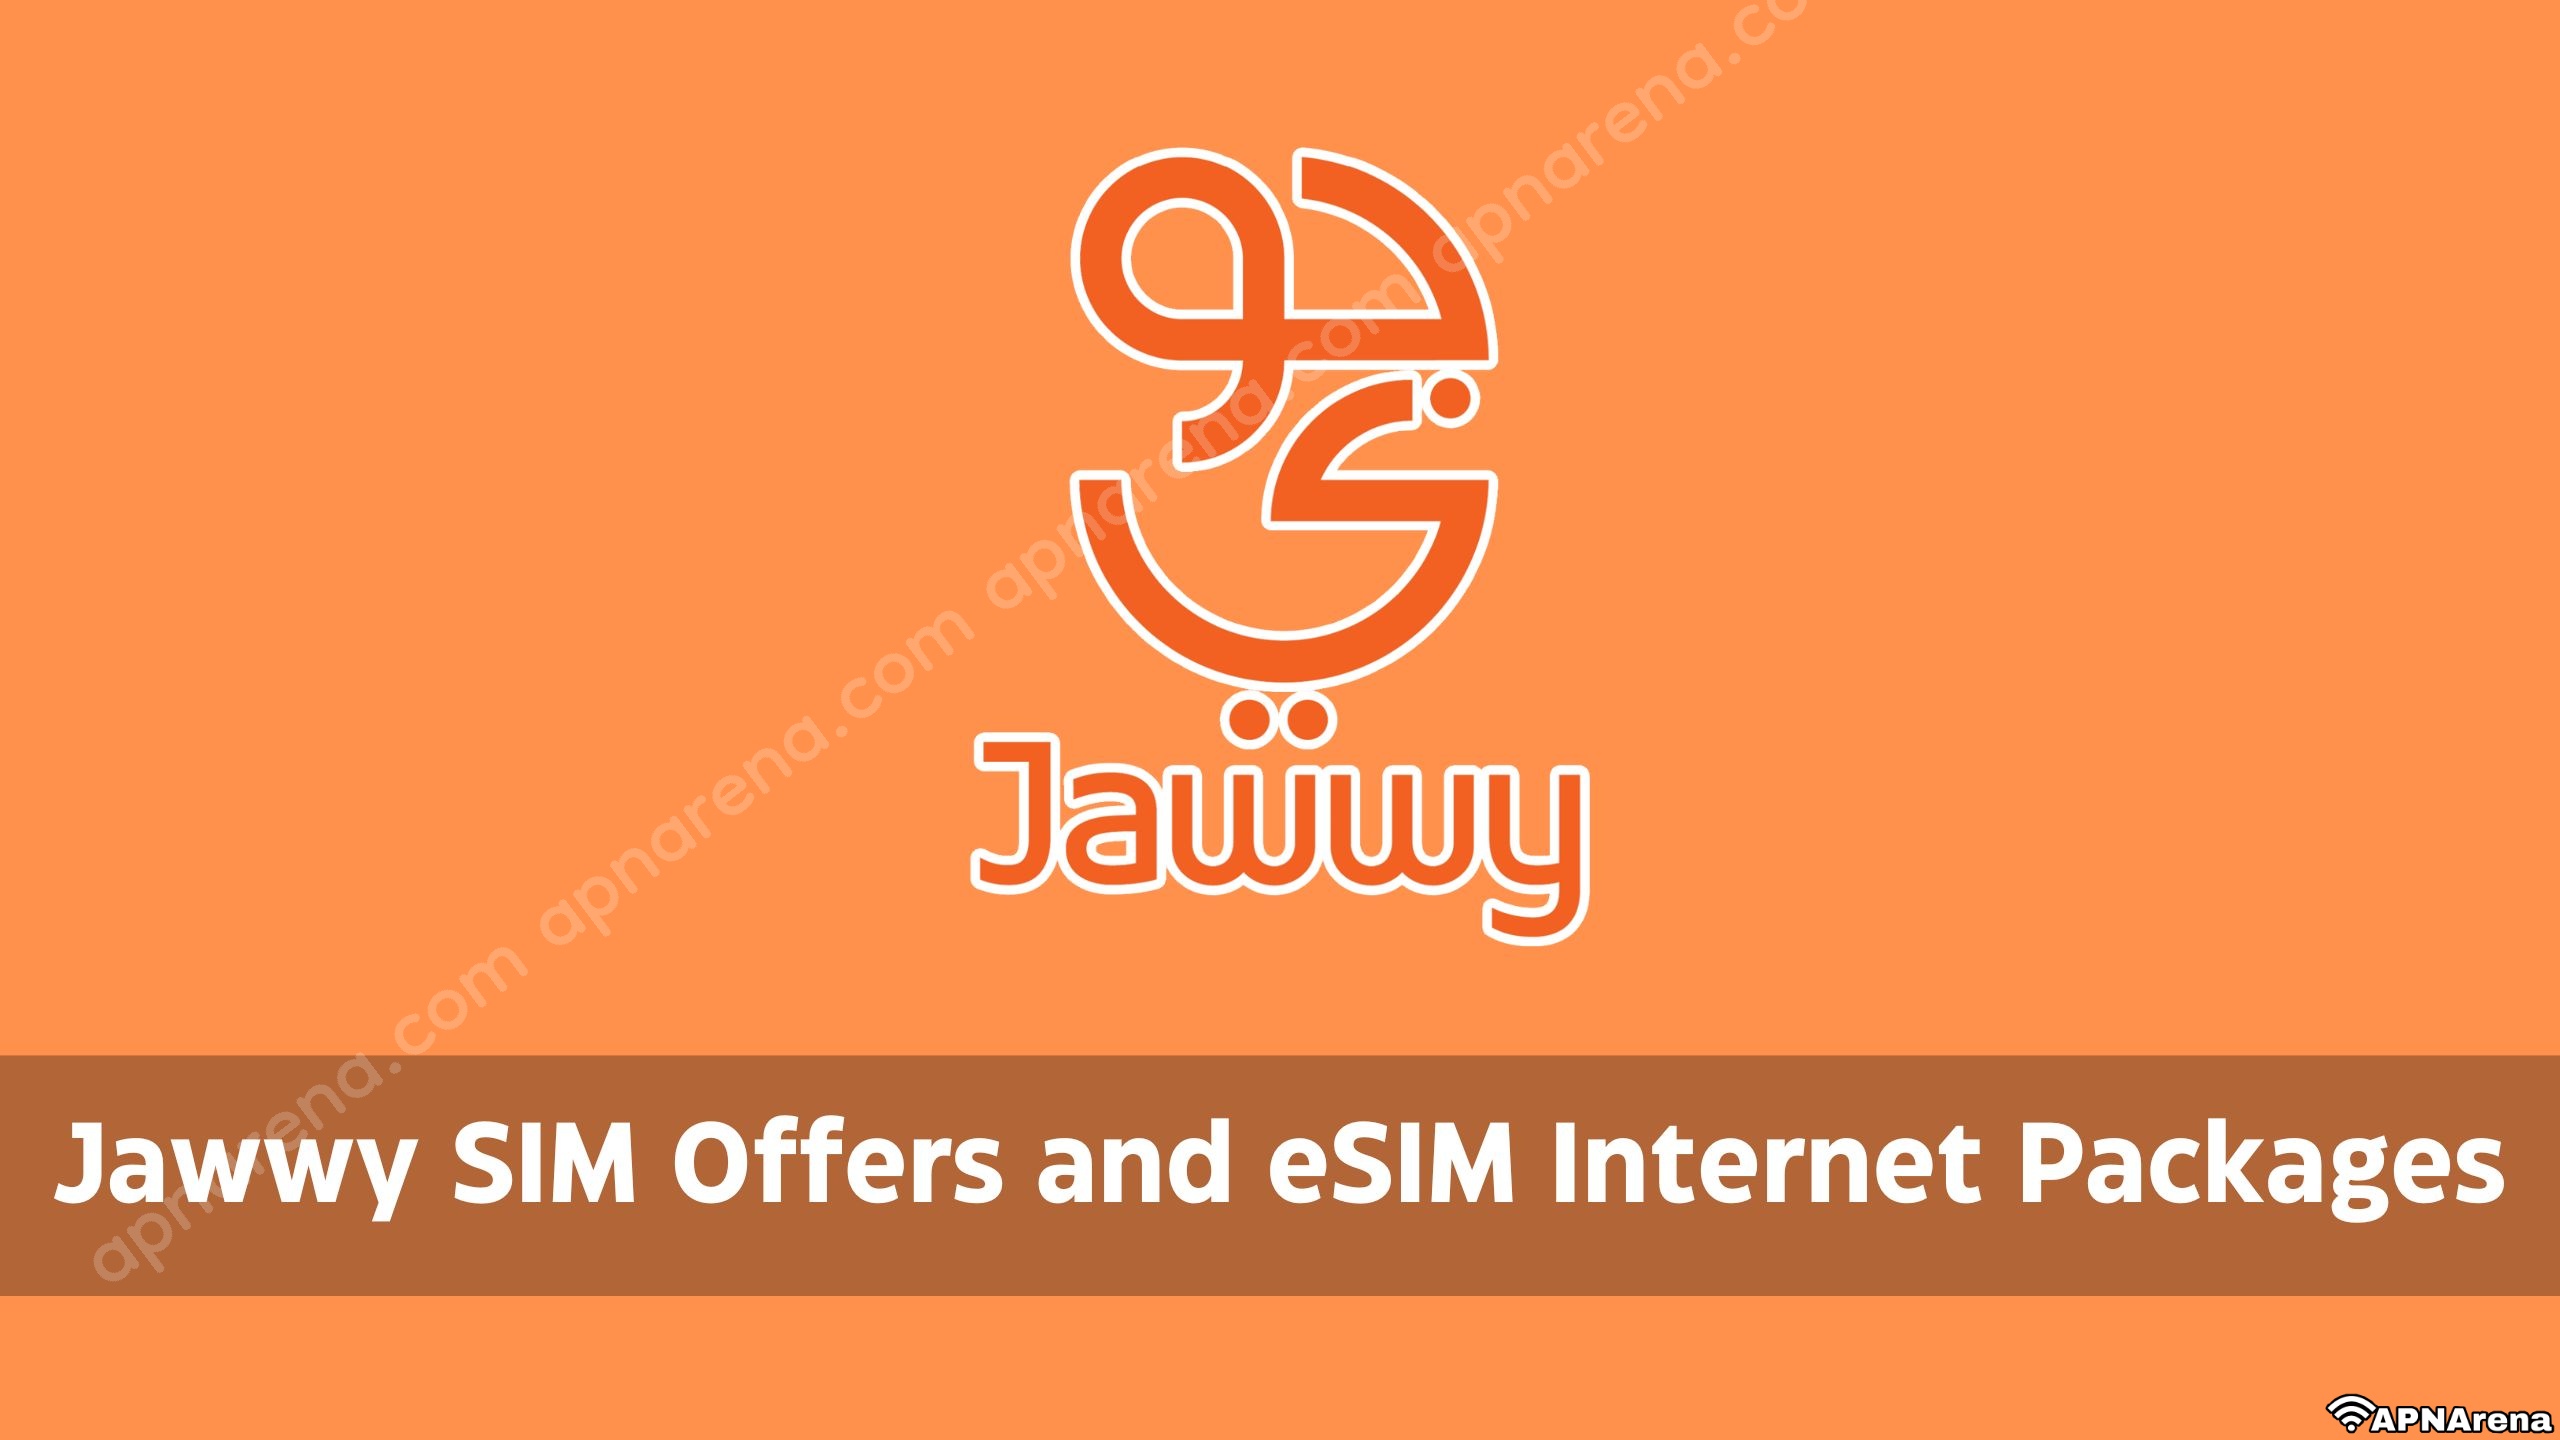 Jawwy SIM Offers and Internet Packages, eSIM Buy & Activation, Number & Balance Check Code